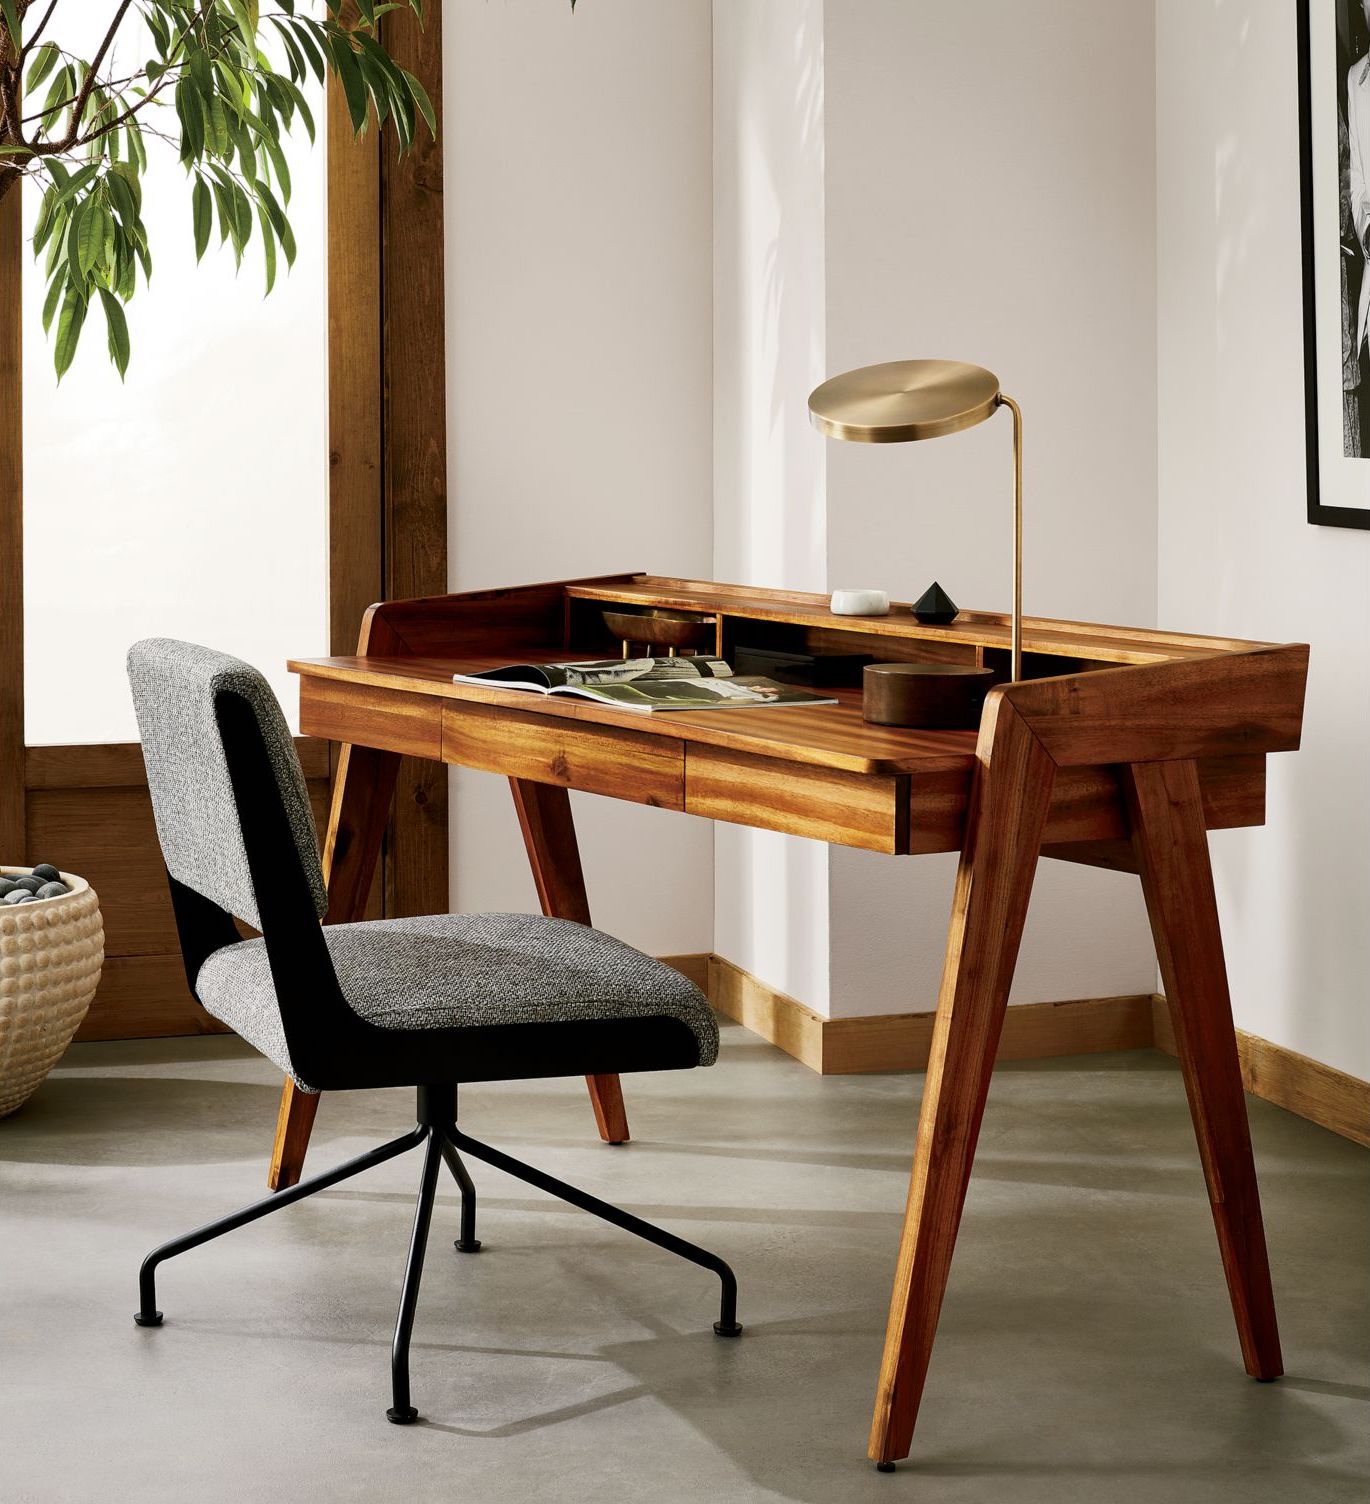 Home-office-in-the-corner-from-CB2-77190